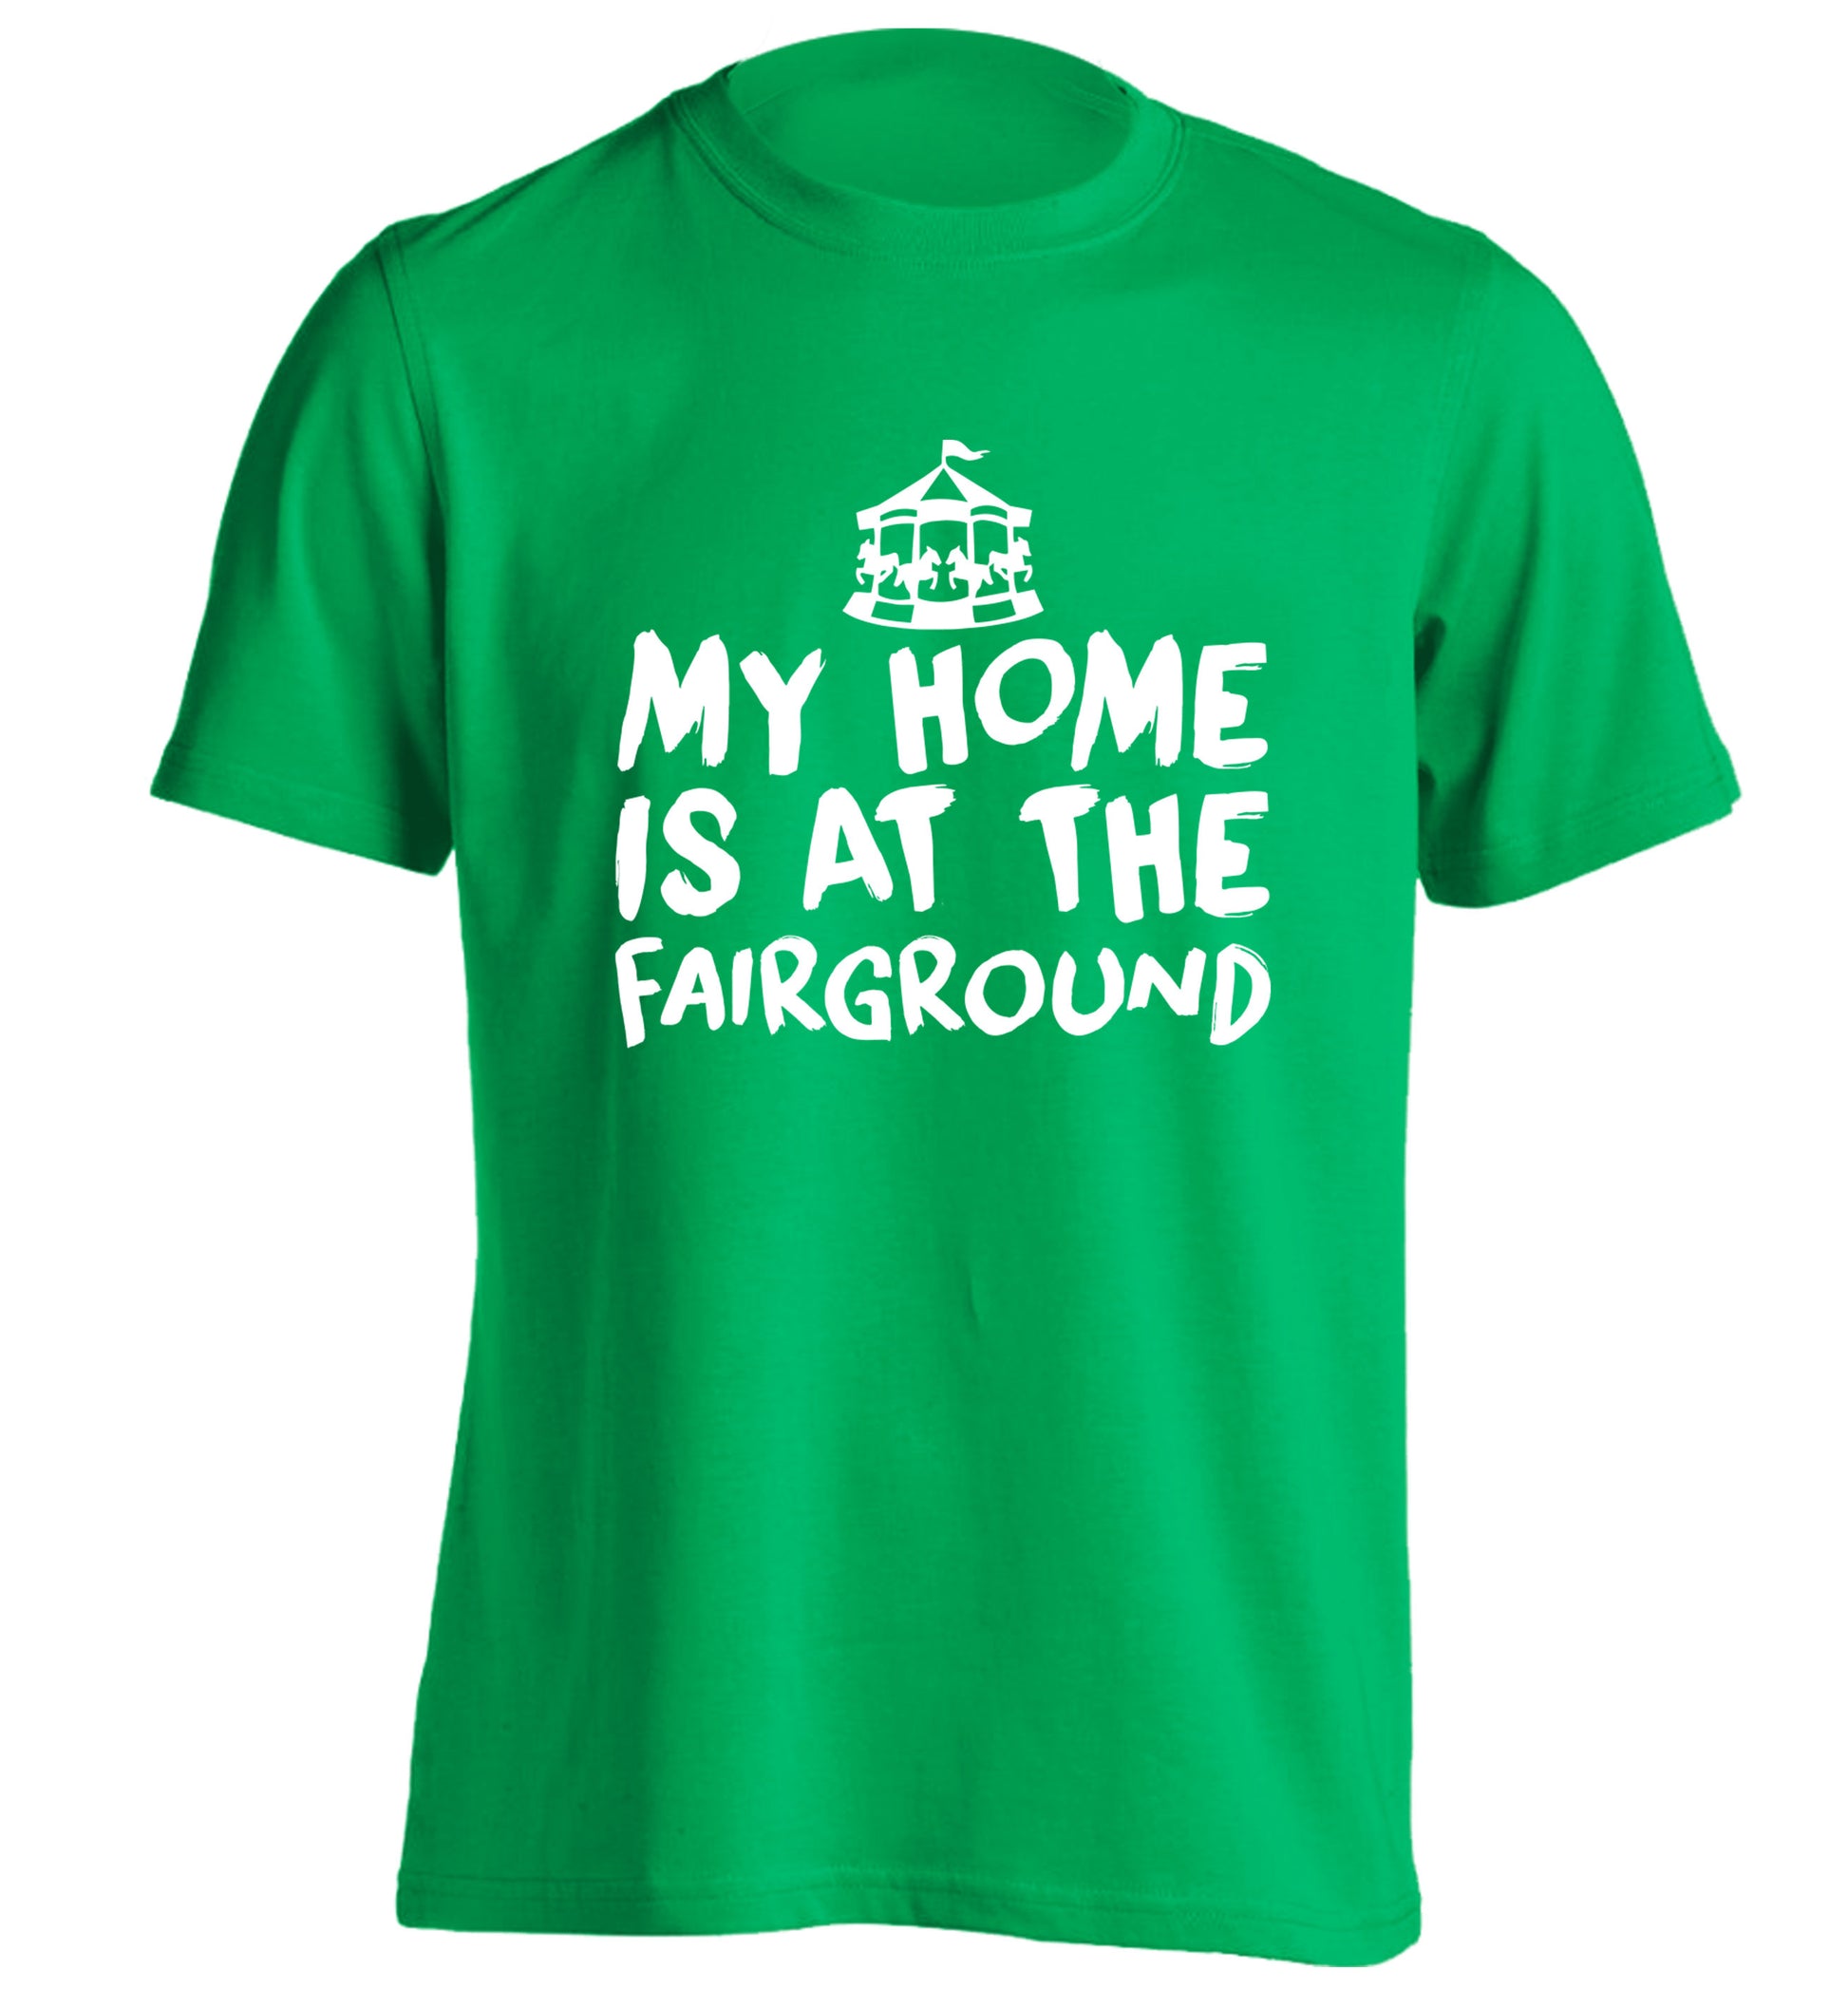 My home is at the fairground adults unisex green Tshirt 2XL